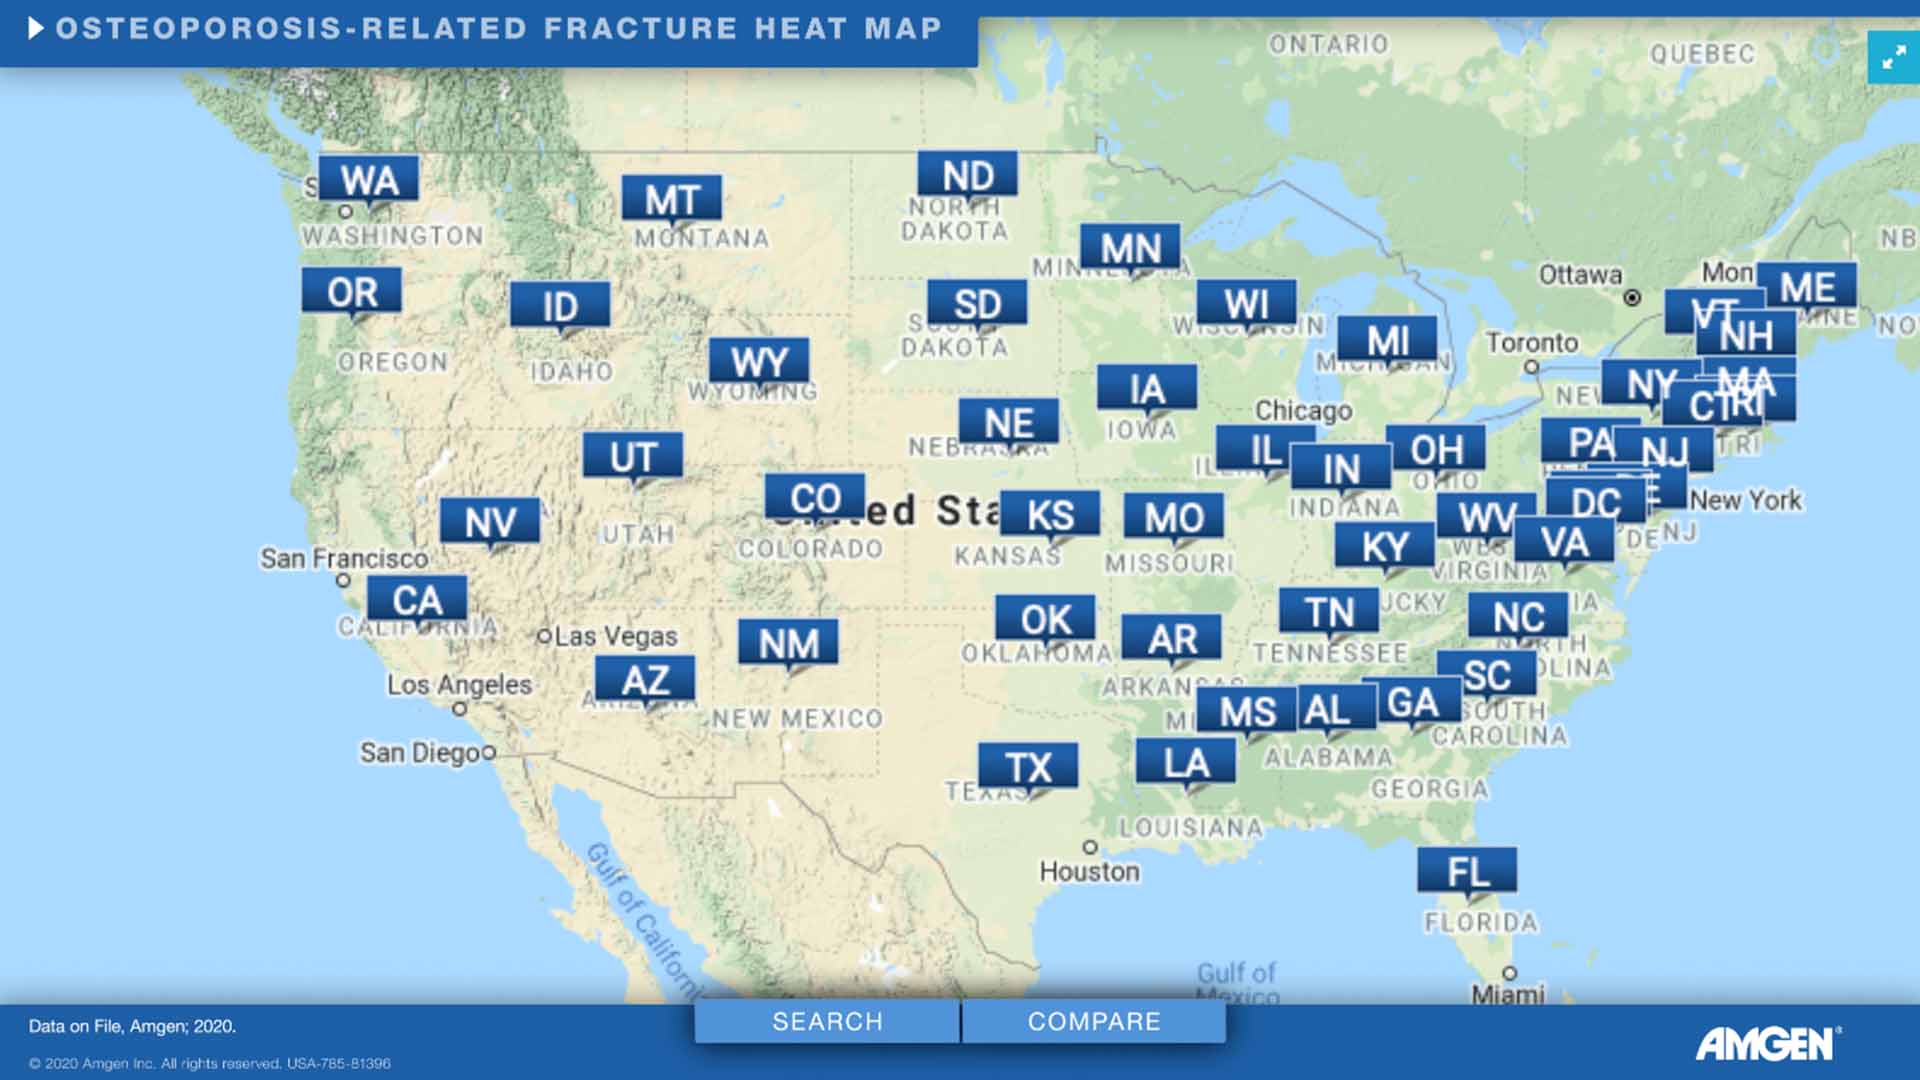 Interactive Heat Map of Osteoporosis-Related Fractures in the USA